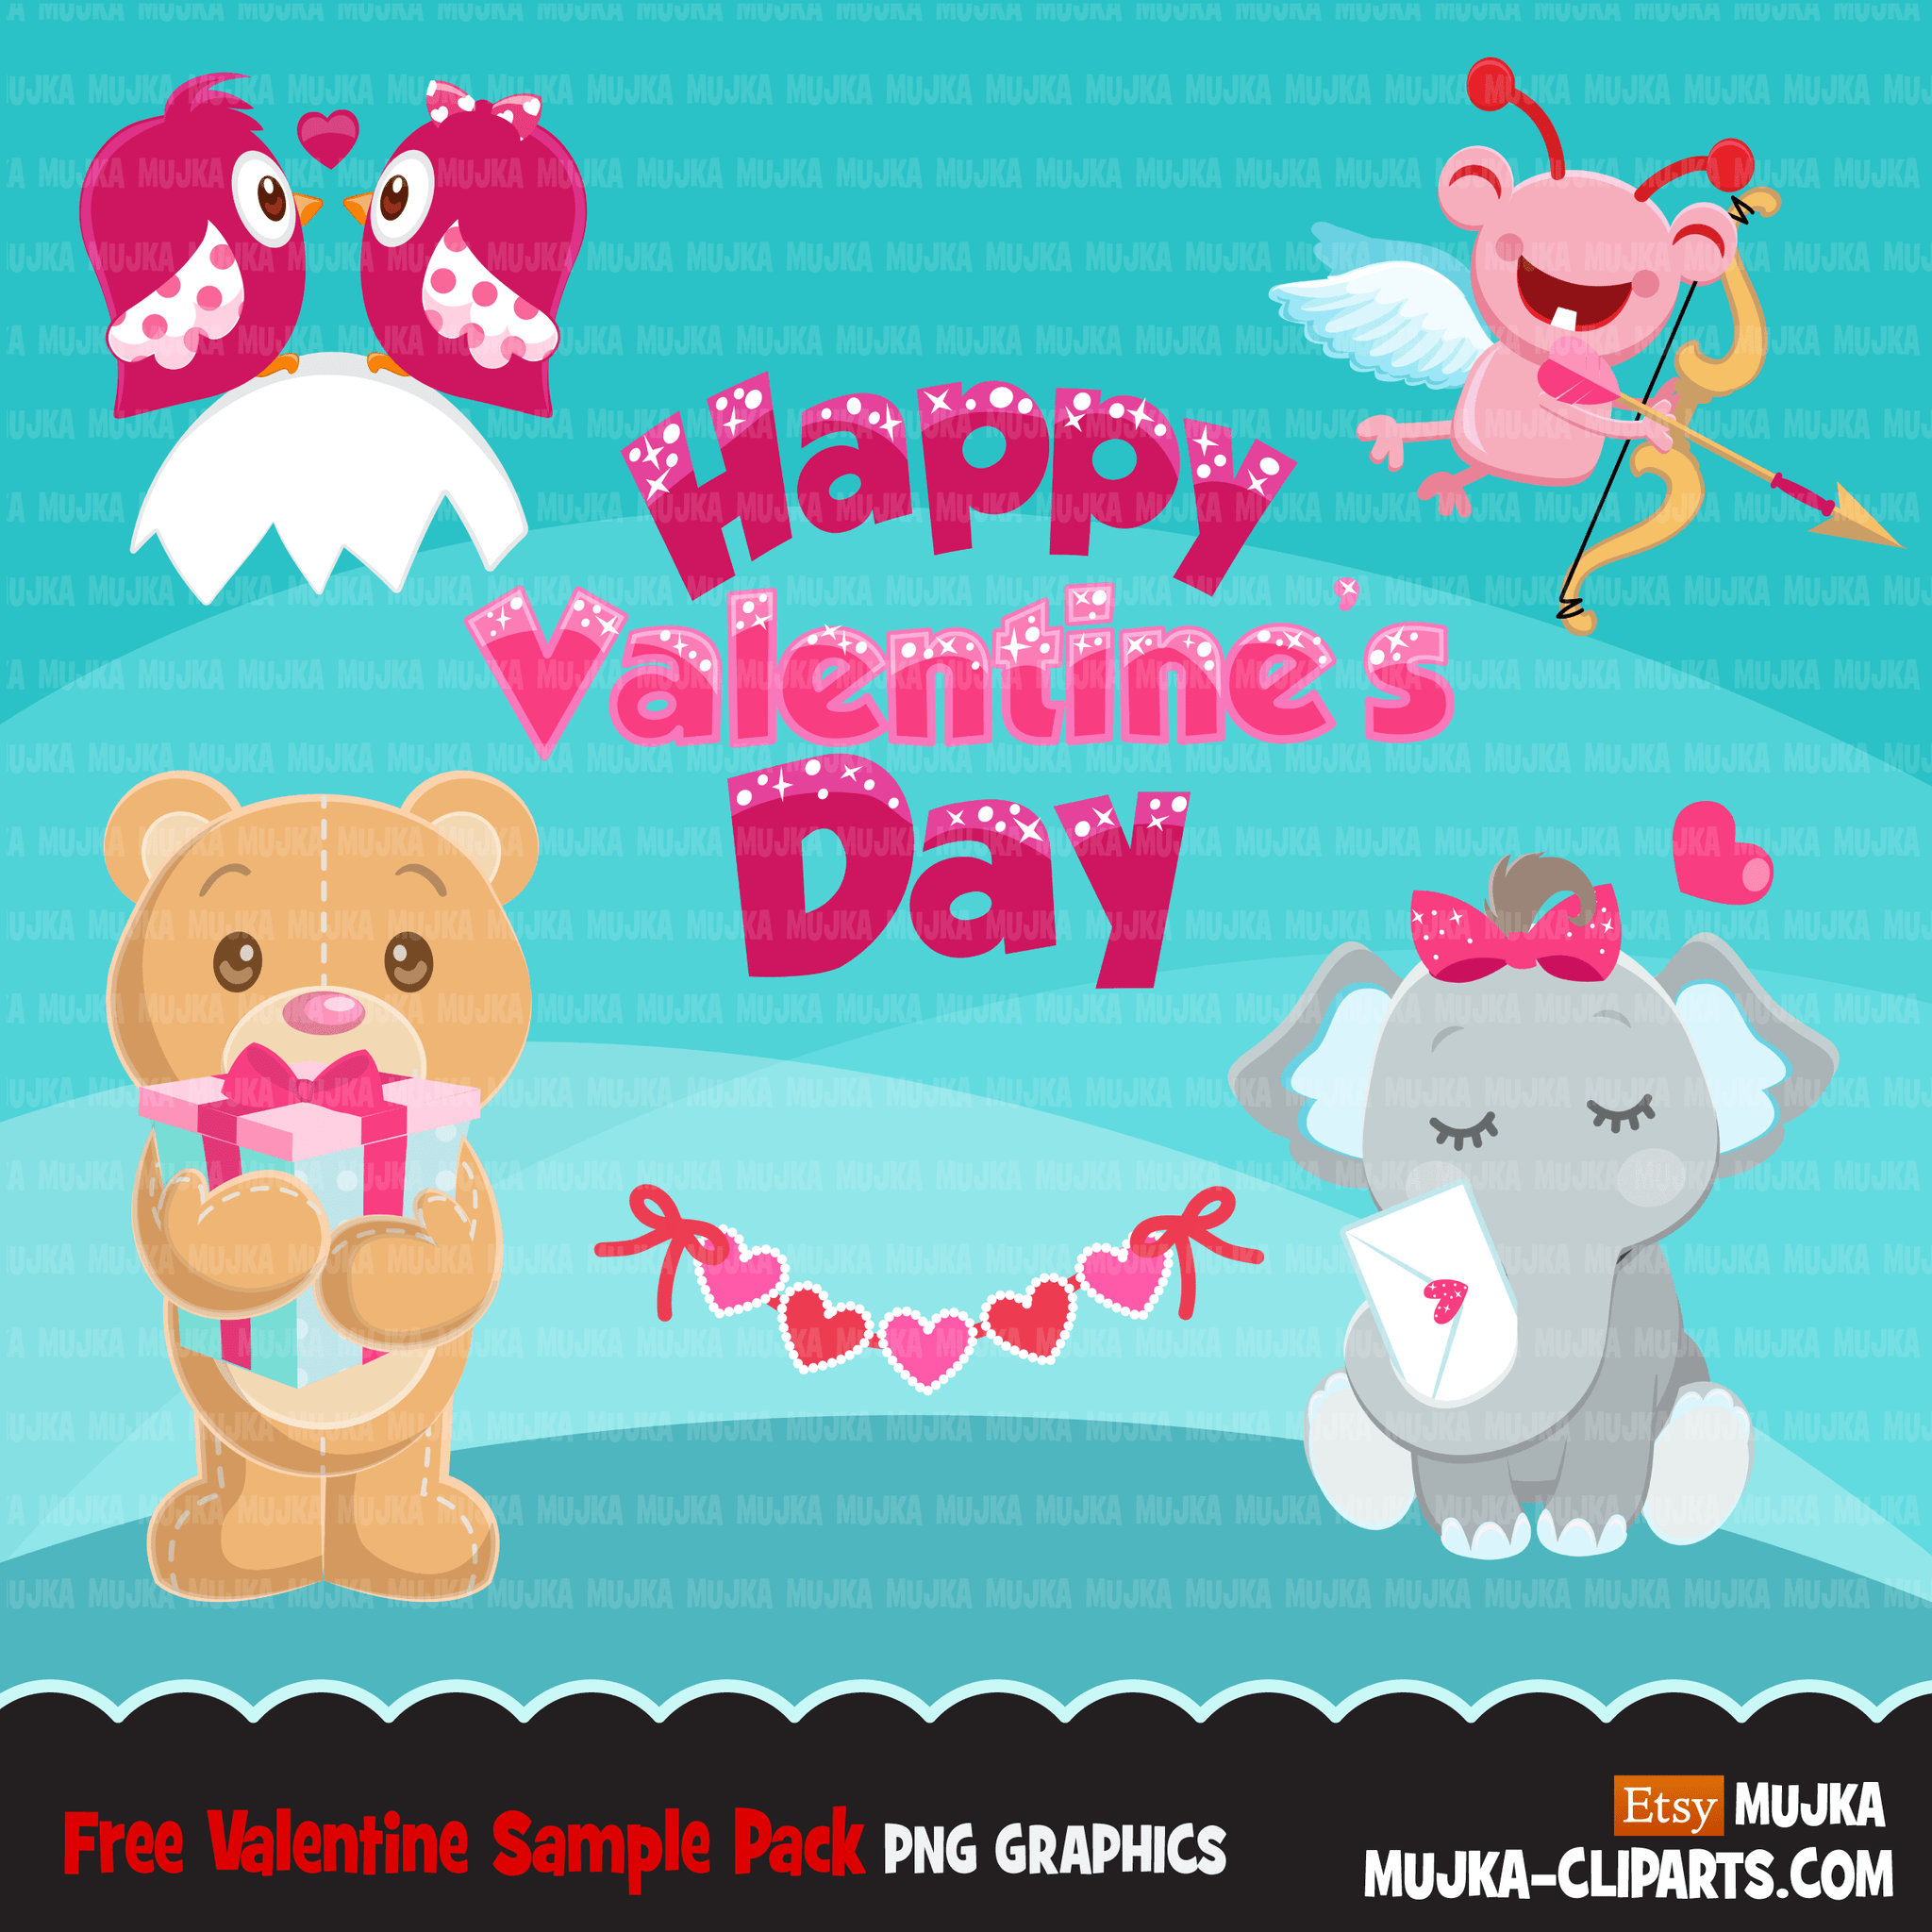 Free Valentine's day clipart, Cute animal graphics, digital PNG personal use Mujka